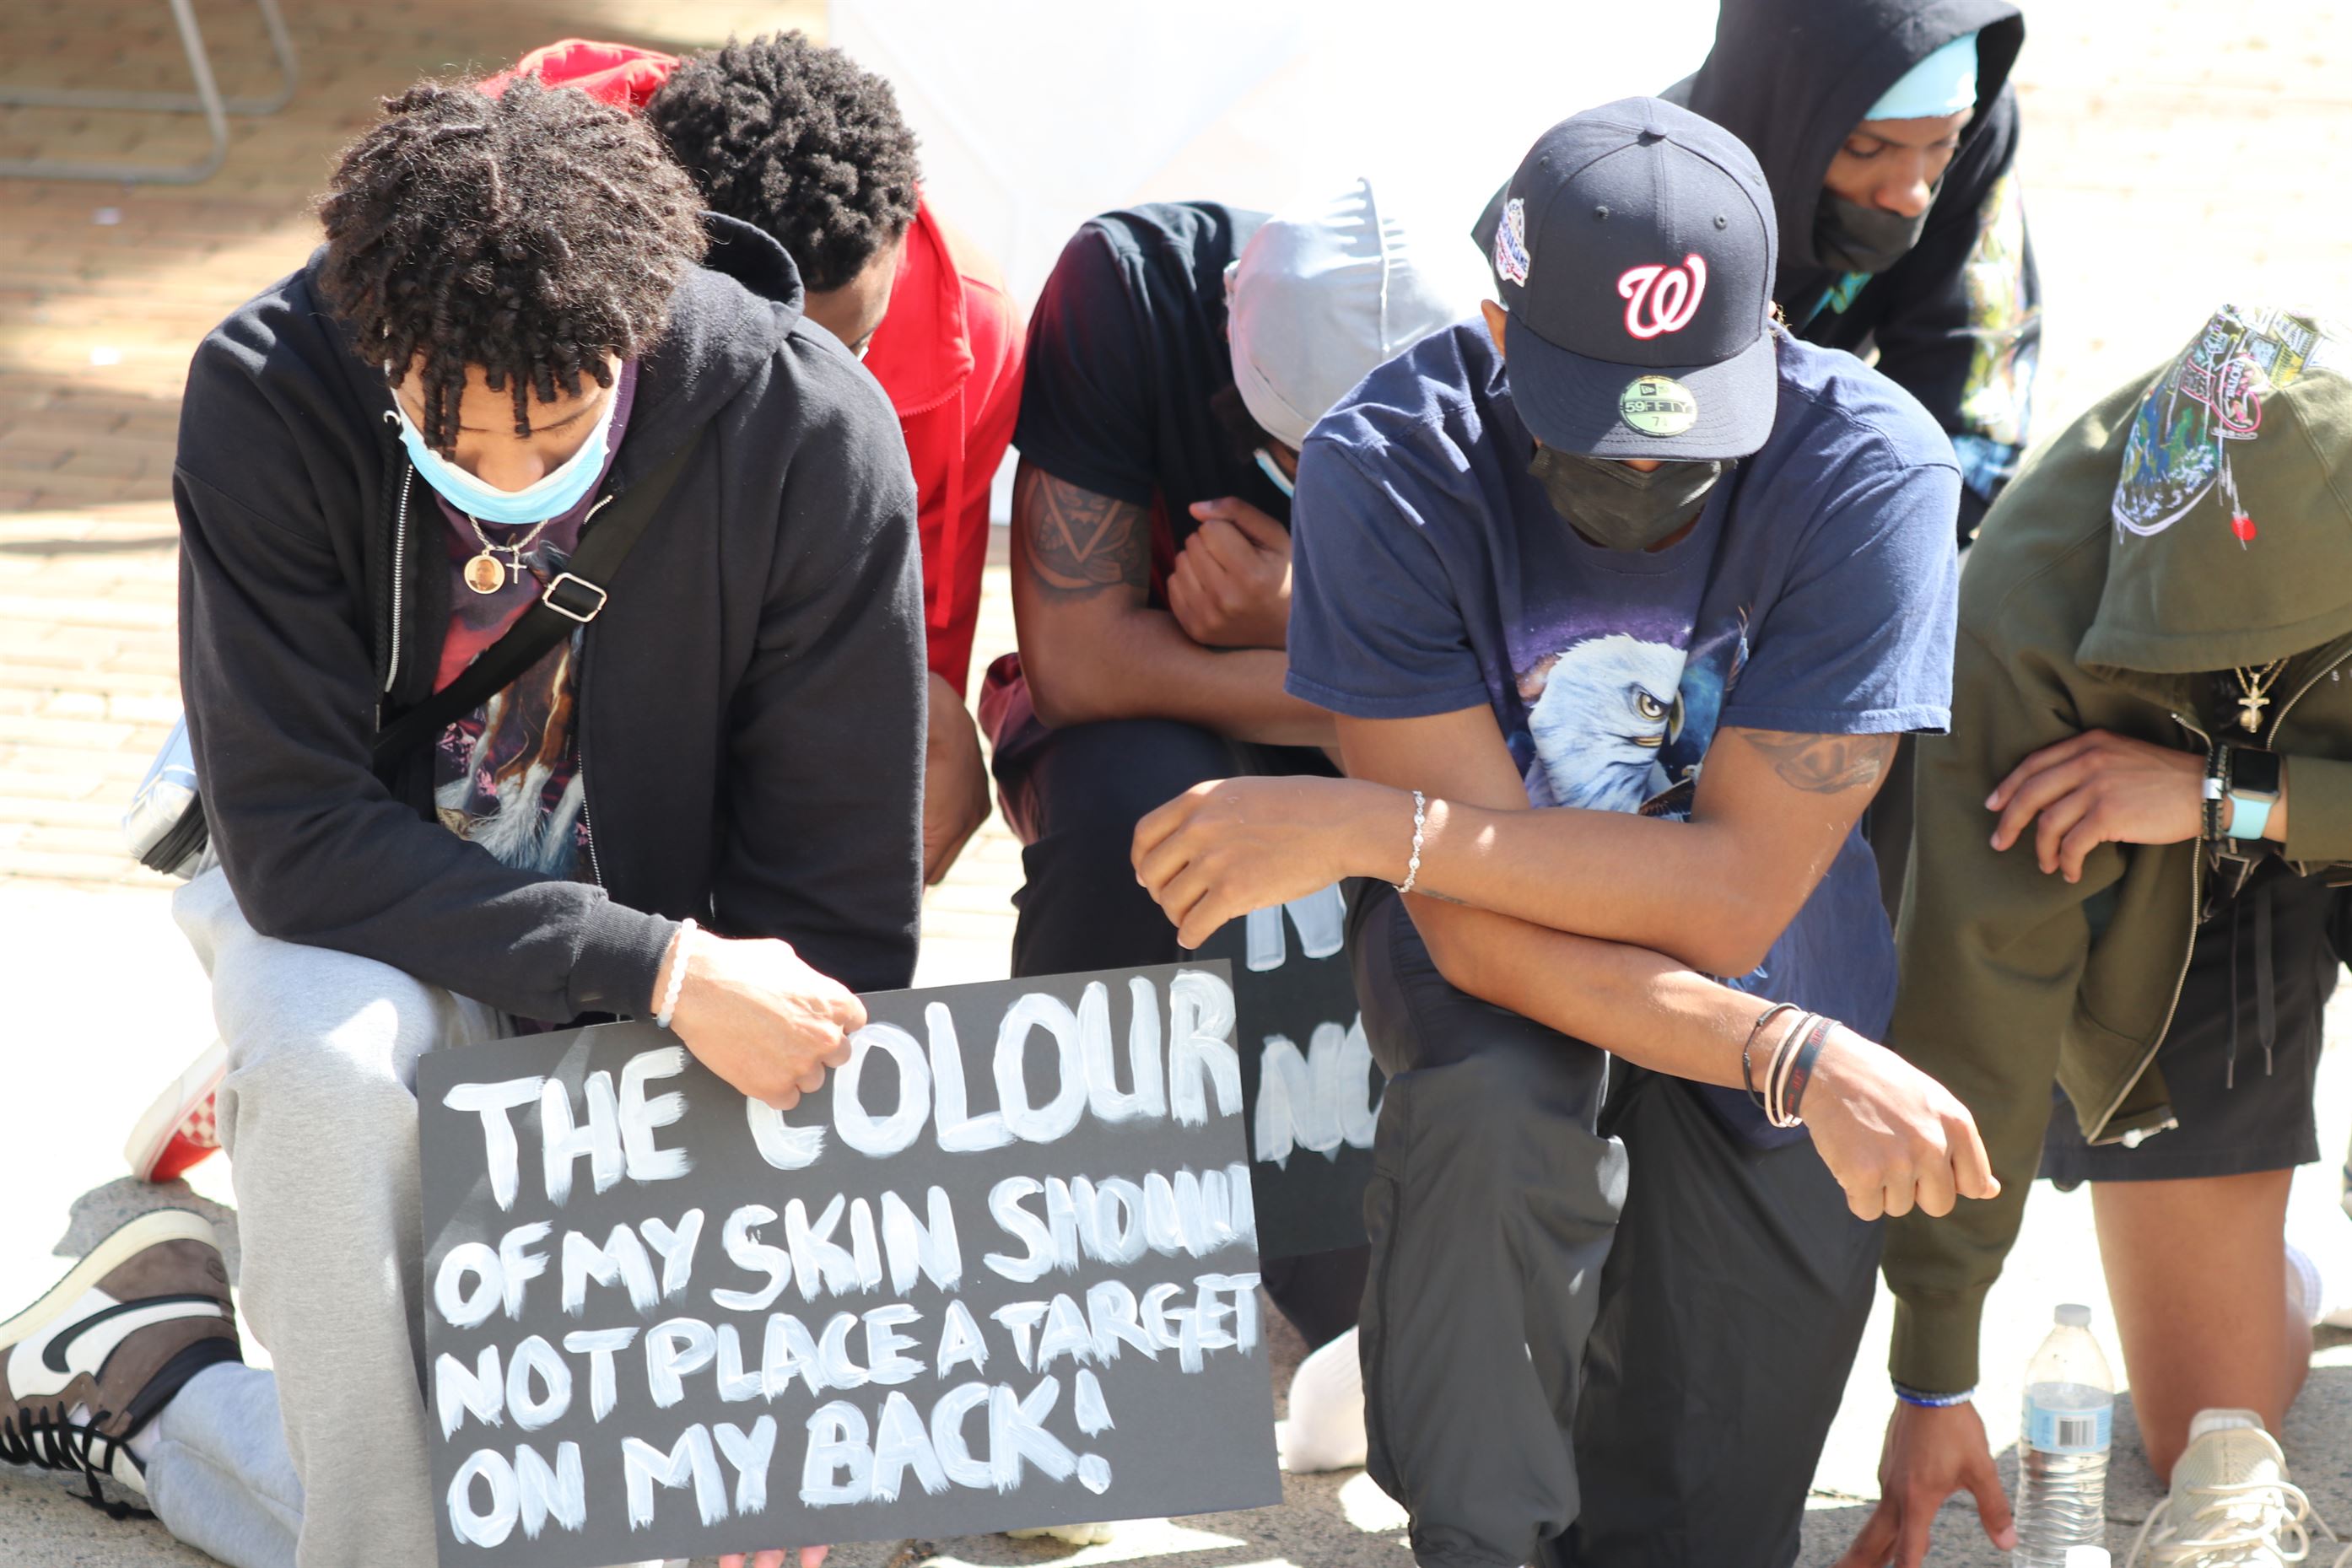 Black men take a knee for three minutes during a moment of silence, and one holds a poster that says “The colour of my skin should not place a target on my back!” Lynise Olivacce | The Montclarion